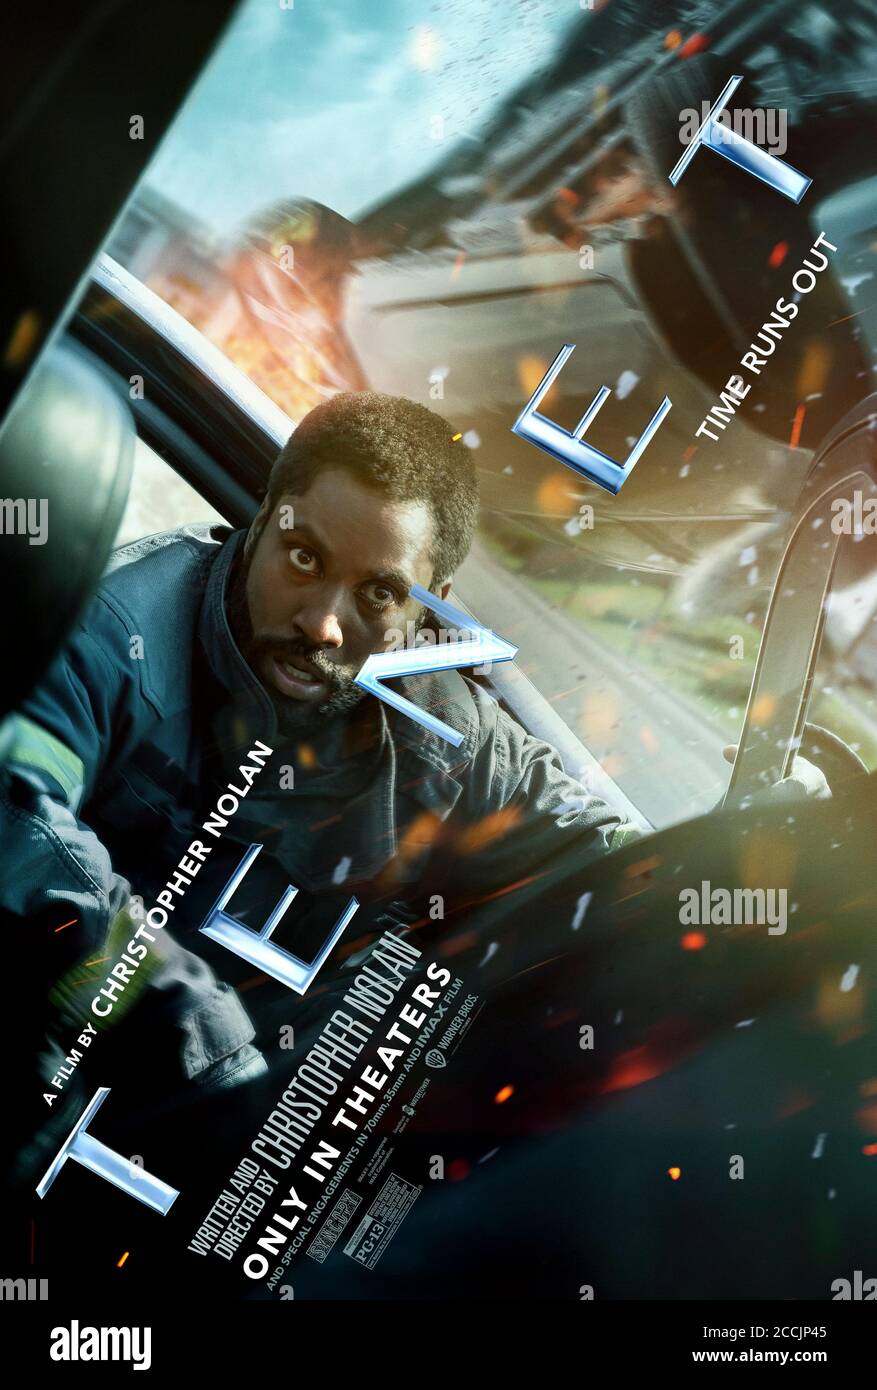 Tenet (2020) directed by Christopher Nolan and starring John David Washington as the Protagonist. International espionage with a twist of time travel and evolution. Stock Photo